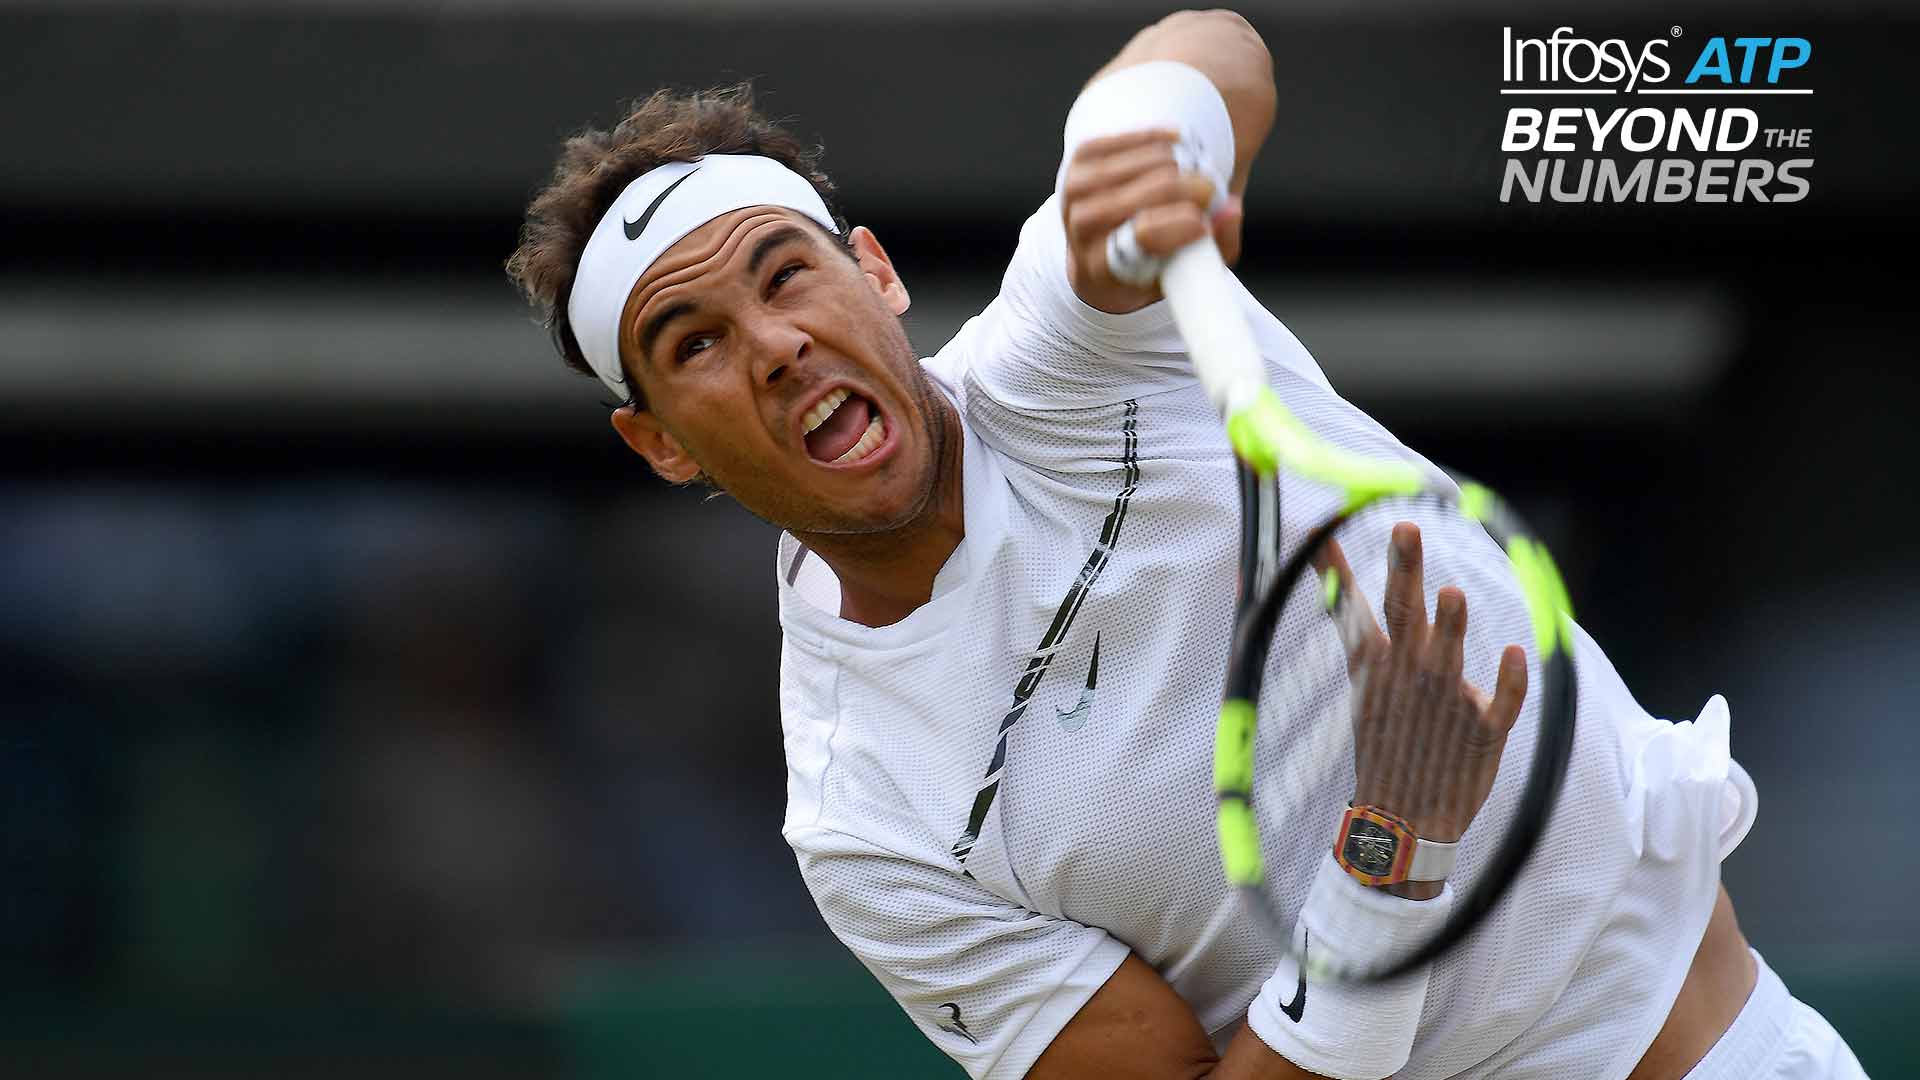 Rafael Nadal's strong second serve has helped him win four titles already this season.